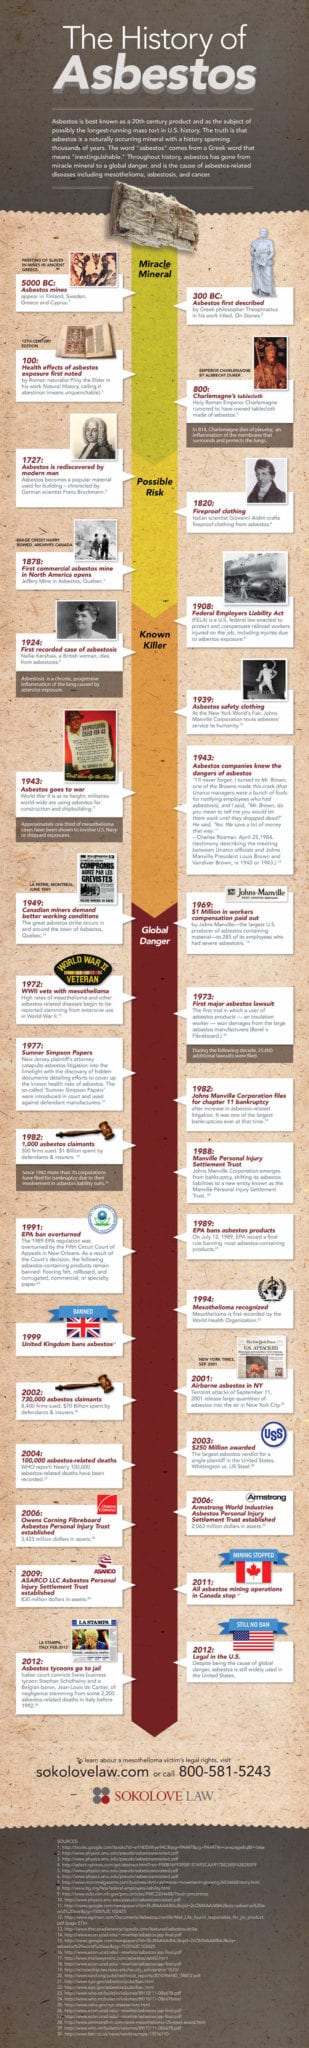 The History of Asbestos Infographic